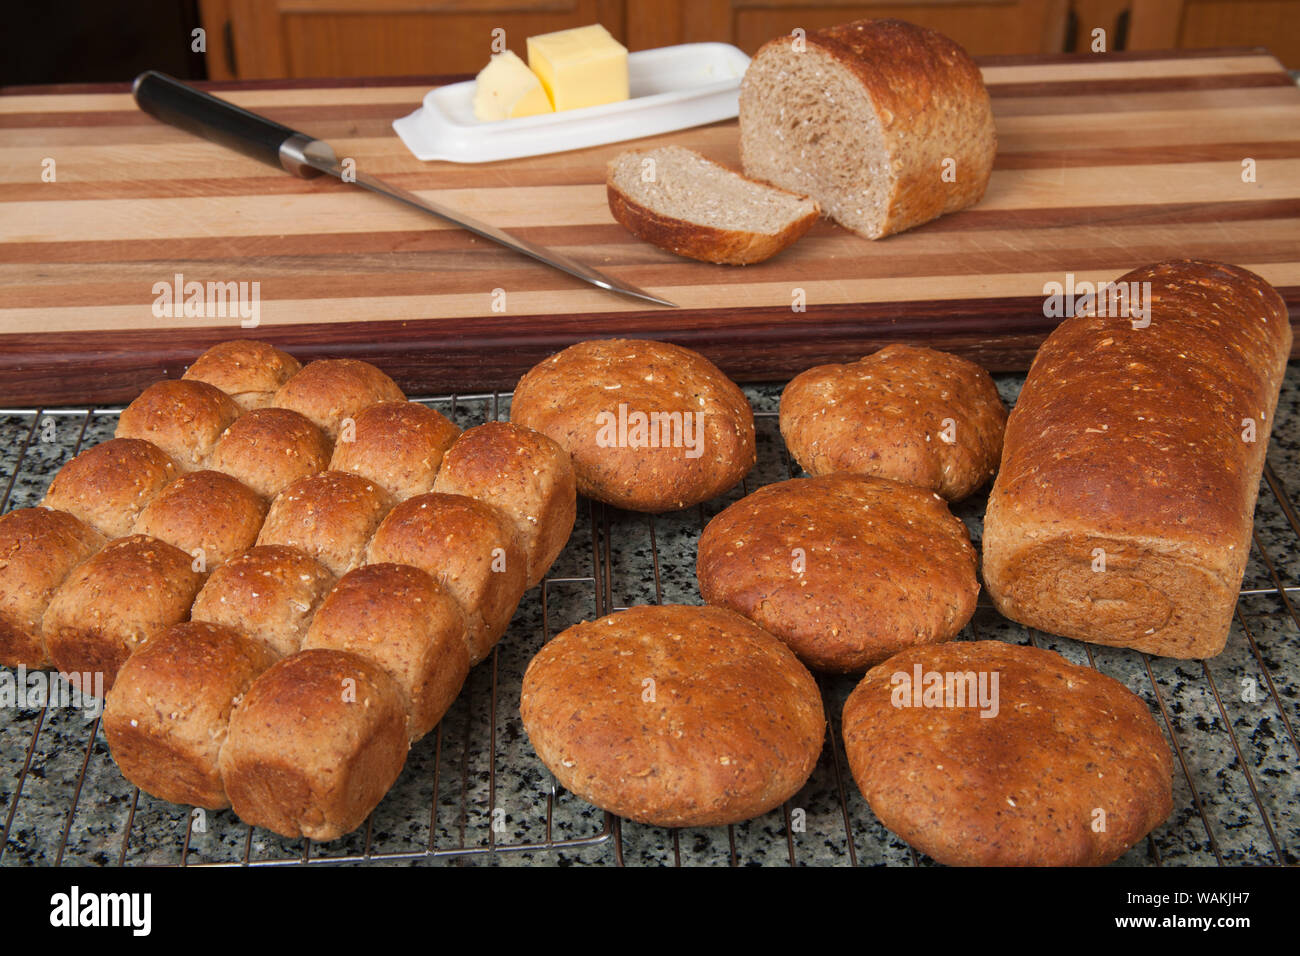 Multigrain rolls, buns and loaf with a slice cut off, with butter and a bread knife. Stock Photo